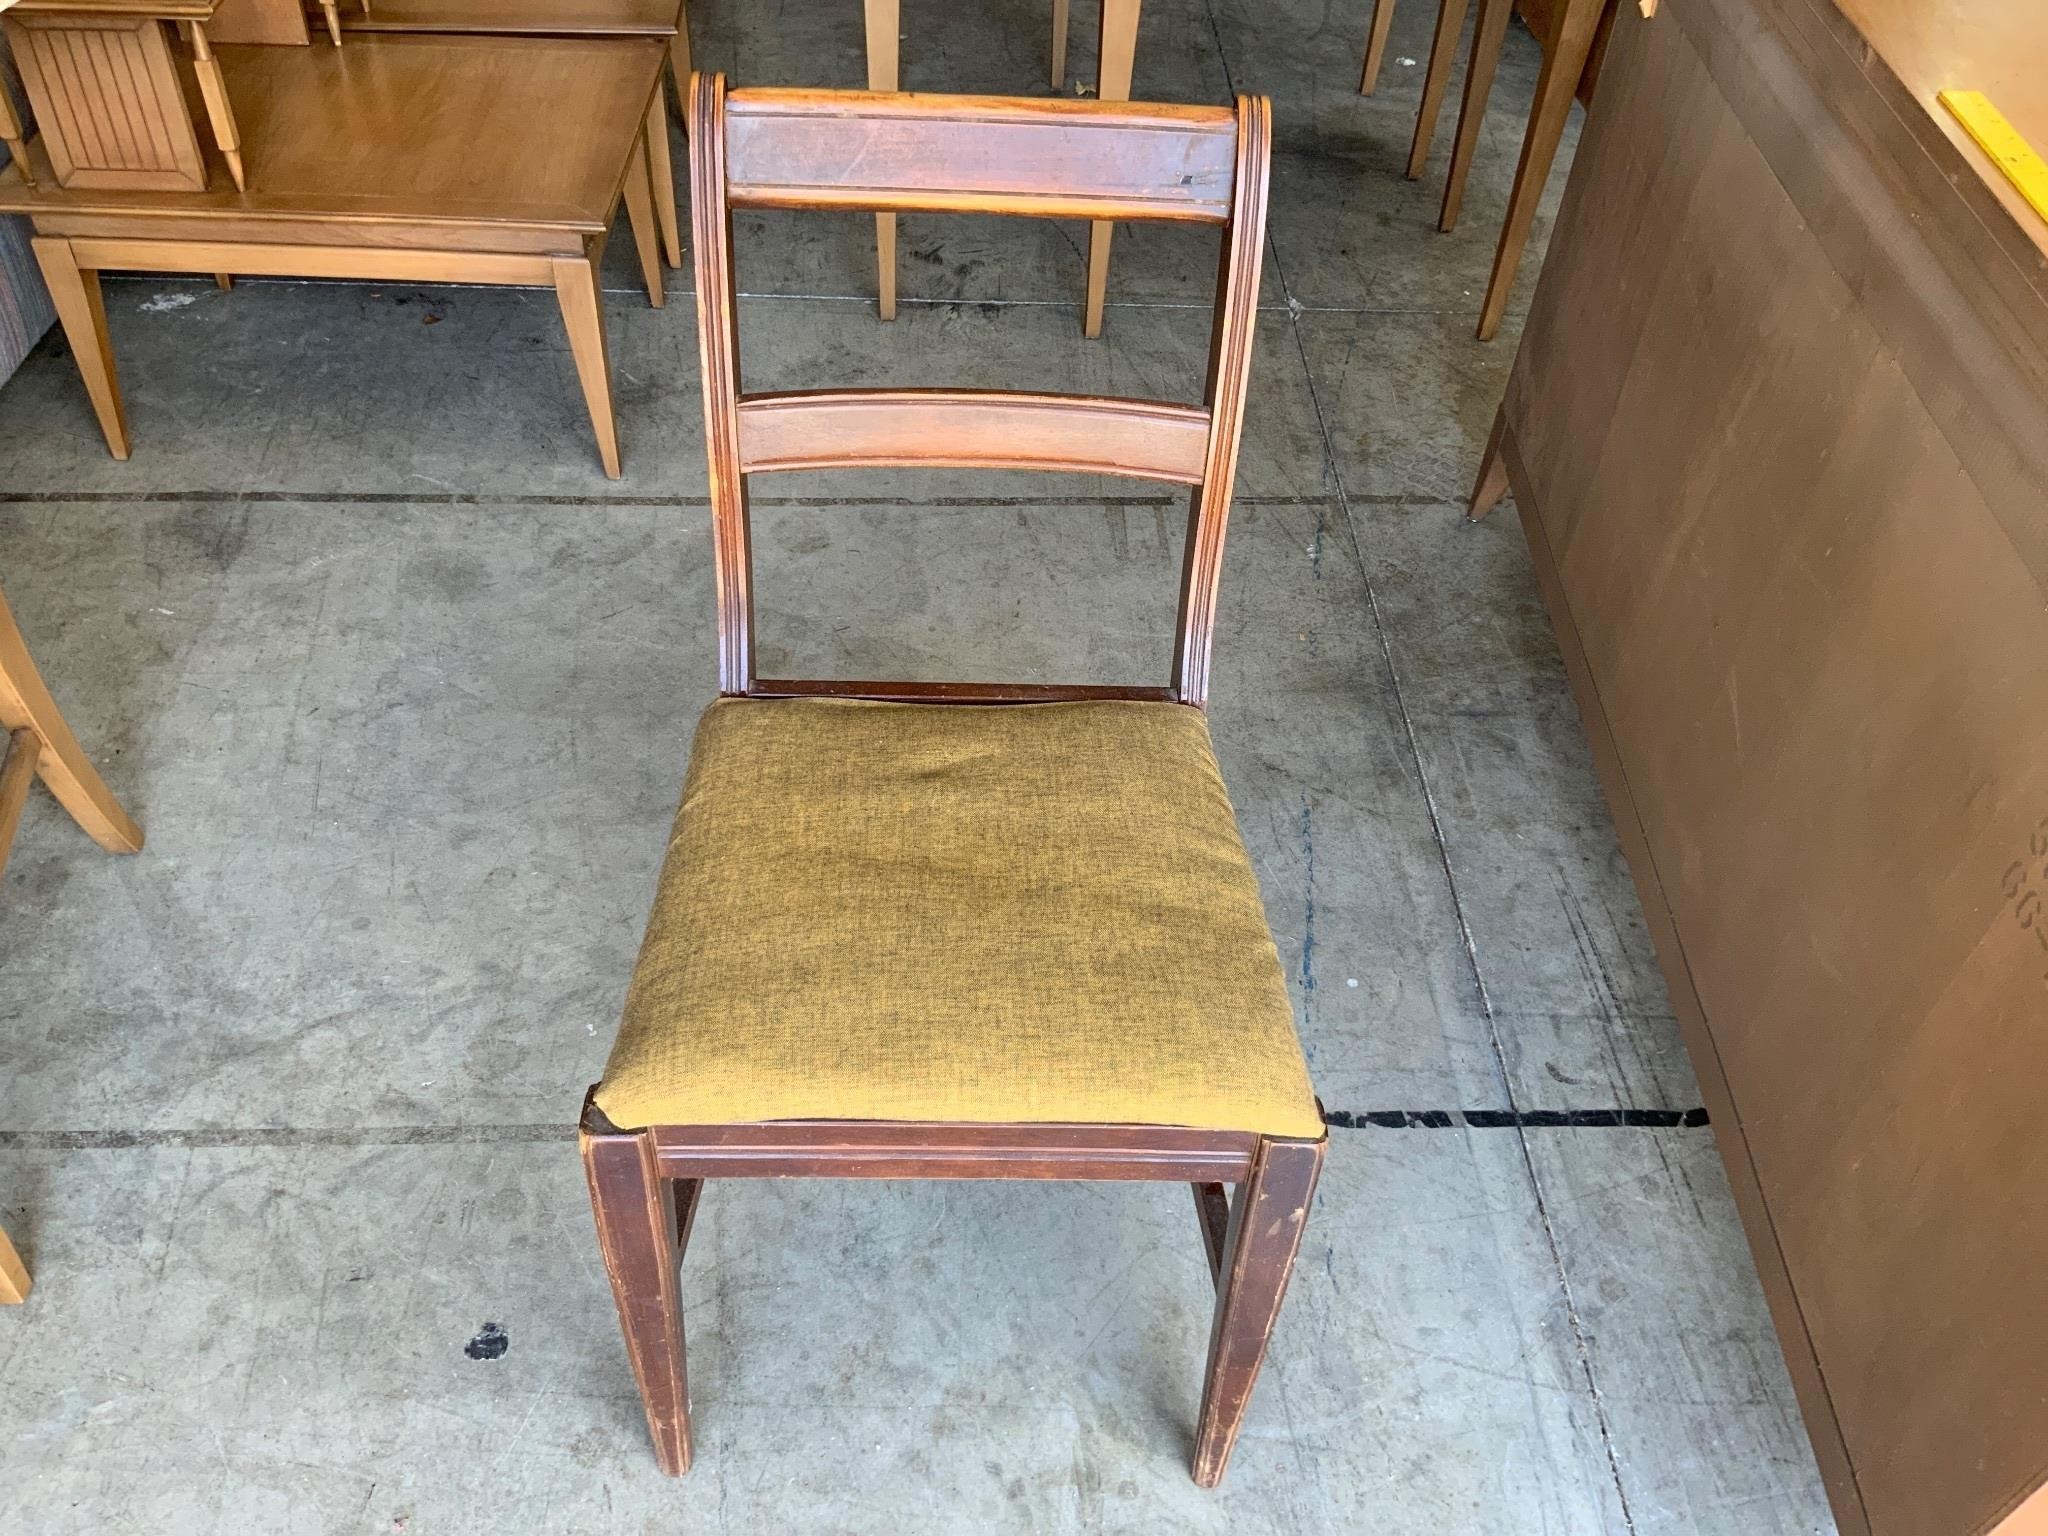 duncan Phyfe style antique chair